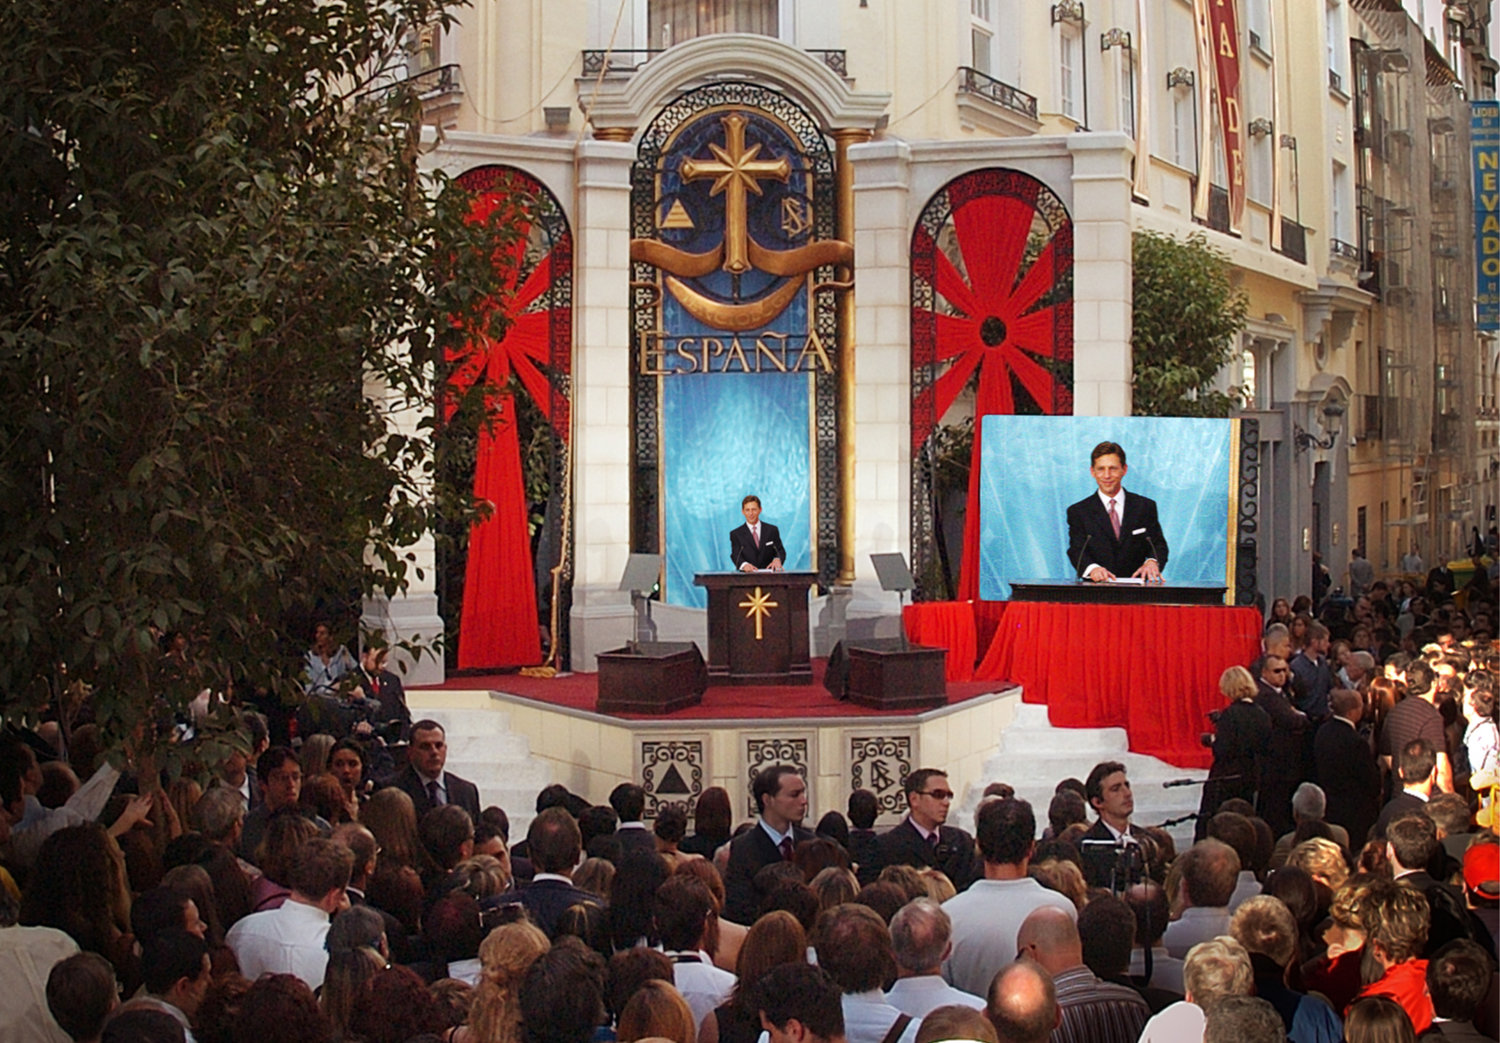 Scientology, celebrating 43 years rooted in Spain